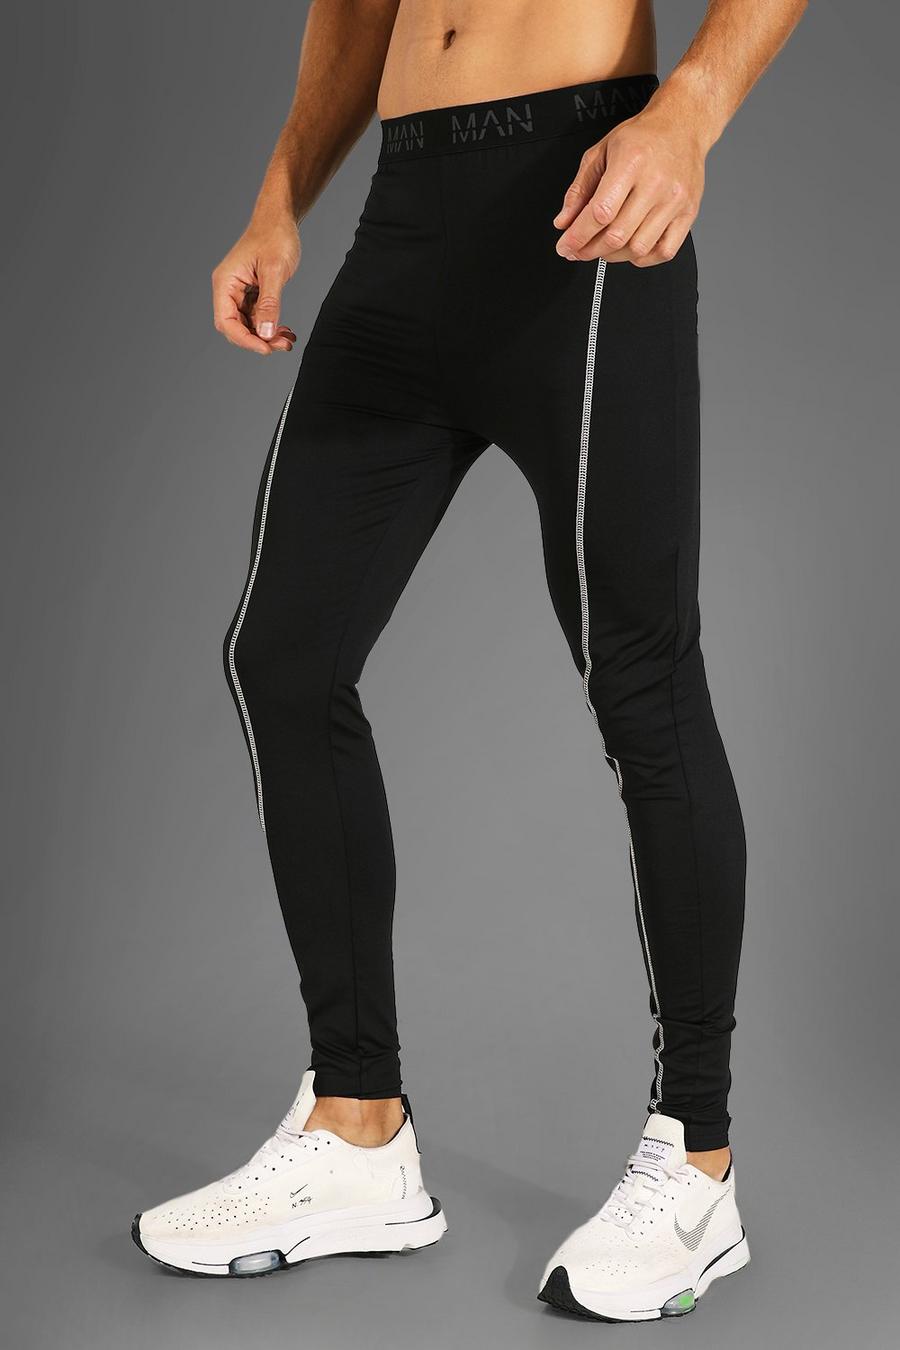 Legging Tall Man Active Gym a compressione, Black nero image number 1